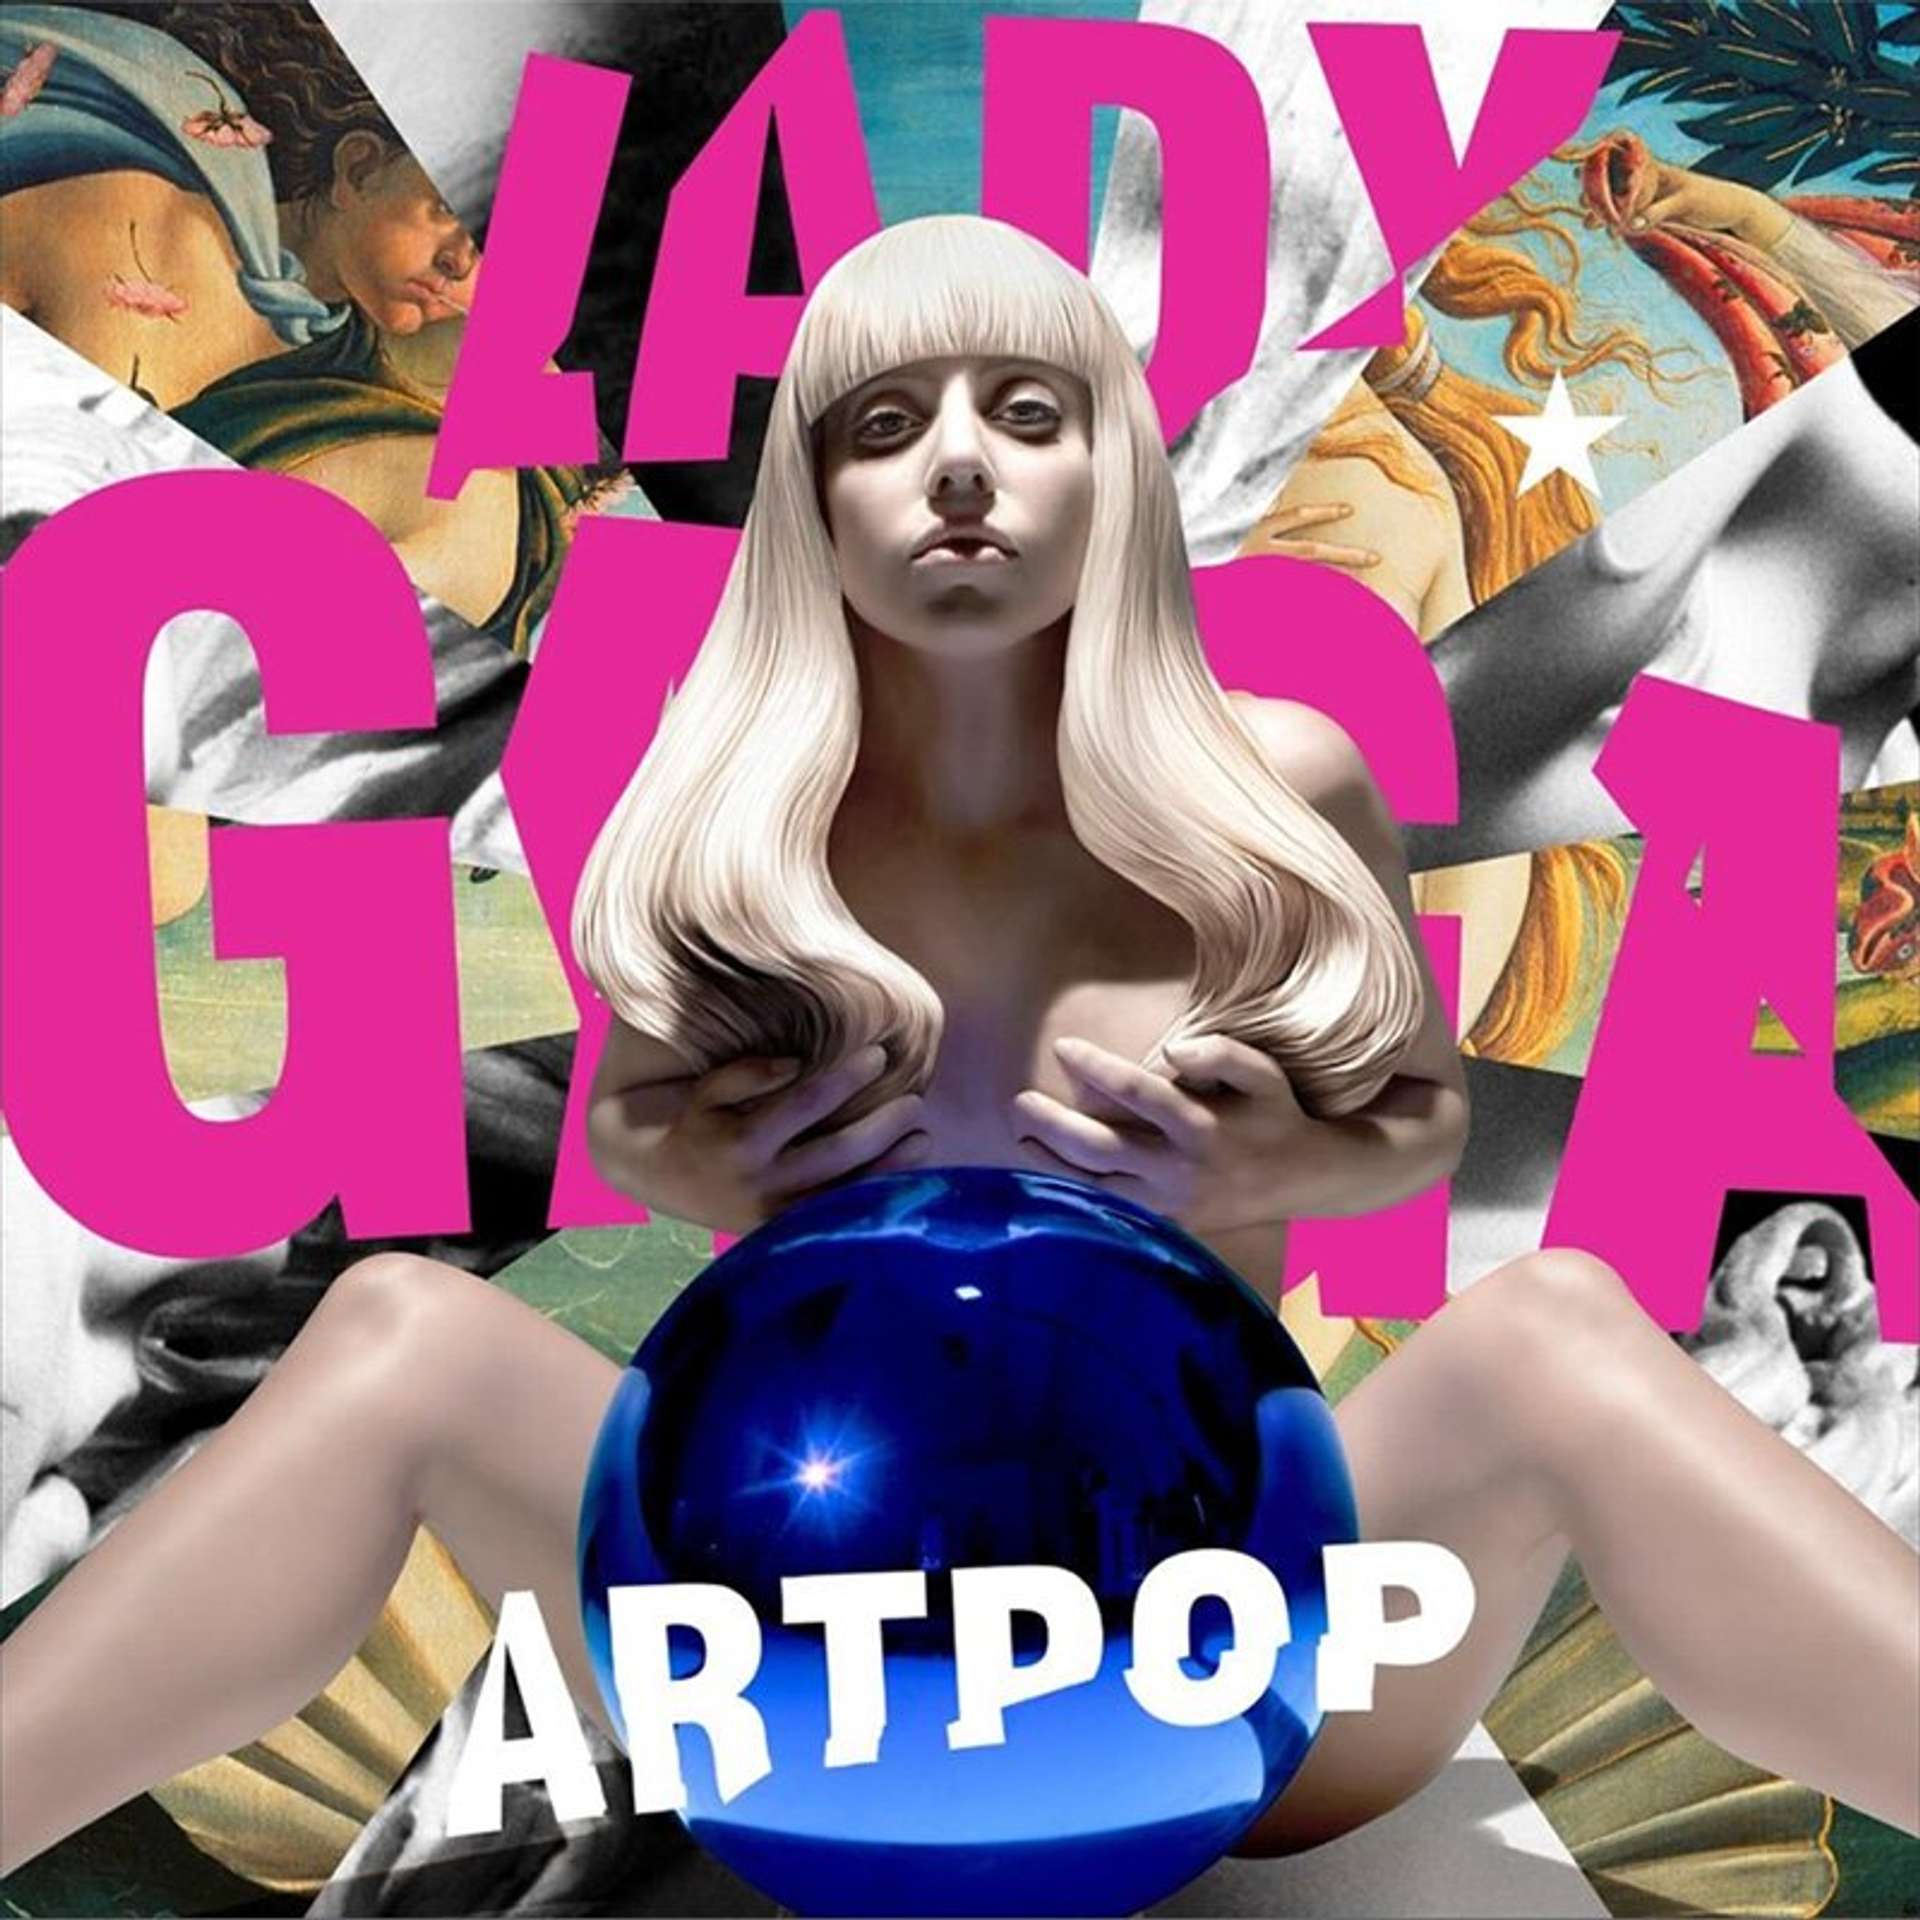 Lady Gaga's cover art for her 2013 album ARTPOP, designed by Jeff Koons. A sculpture of Gaga appears at the centre of the cover, with a shiny blue ball covering her crotch. Gaga's name is written in bright pink behind the sculpture, spliced with fragments of famous paintings. The title ‘ARTPOP’ is written on top of the blue ball at the bottom of the cover.